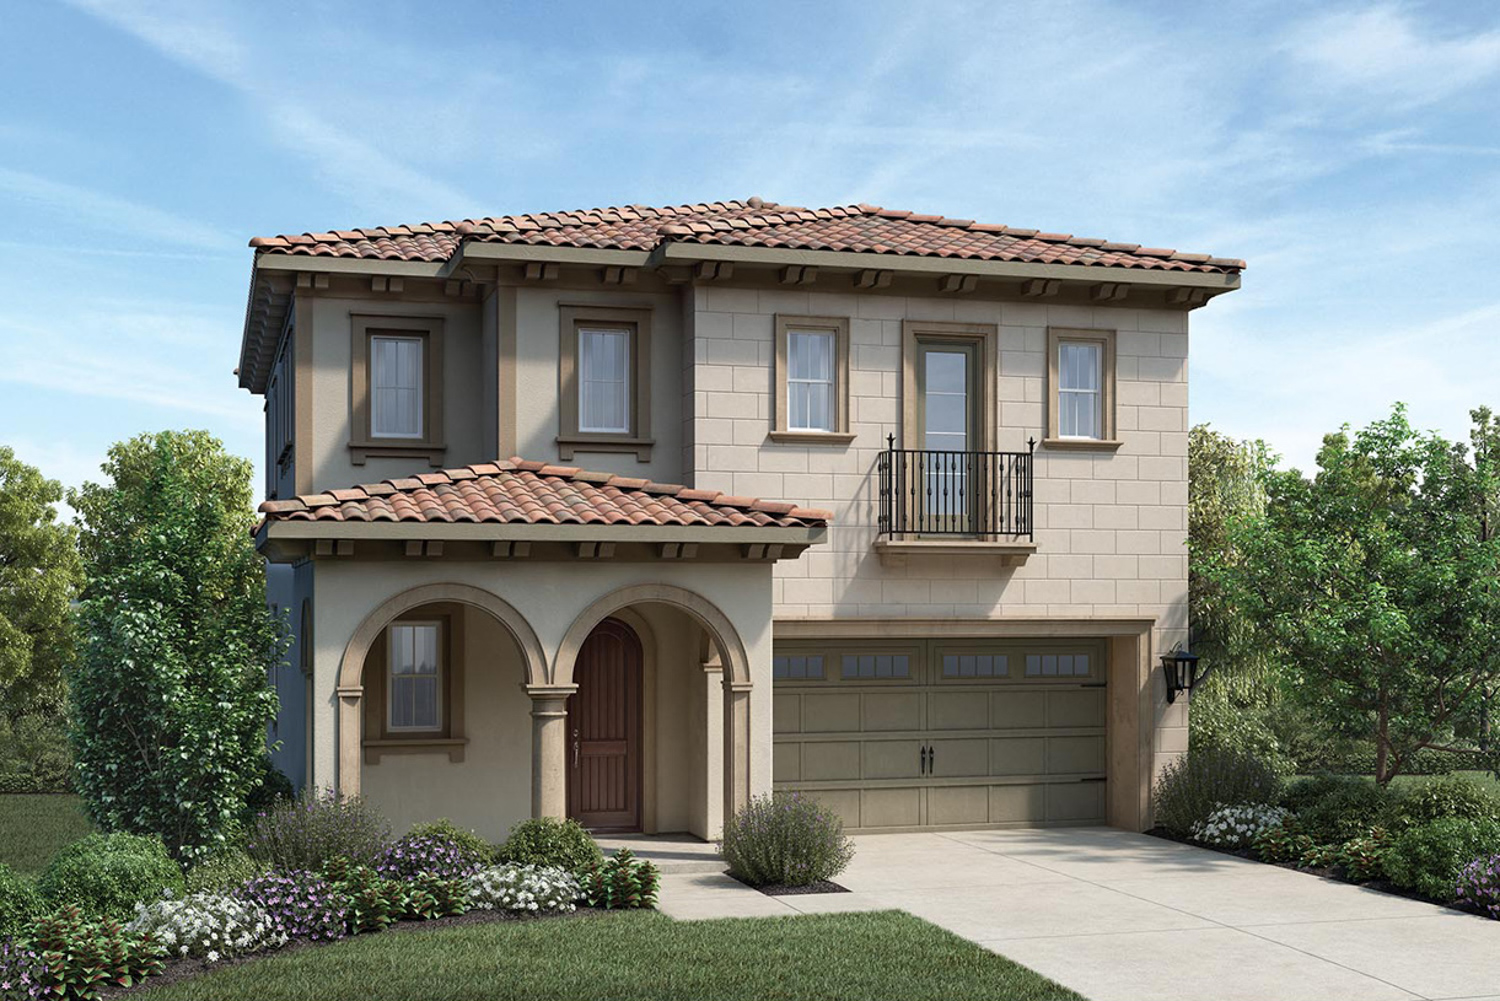 Lot 29 for Serena at Gale Ranch, rendering courtesy Toll Brothers